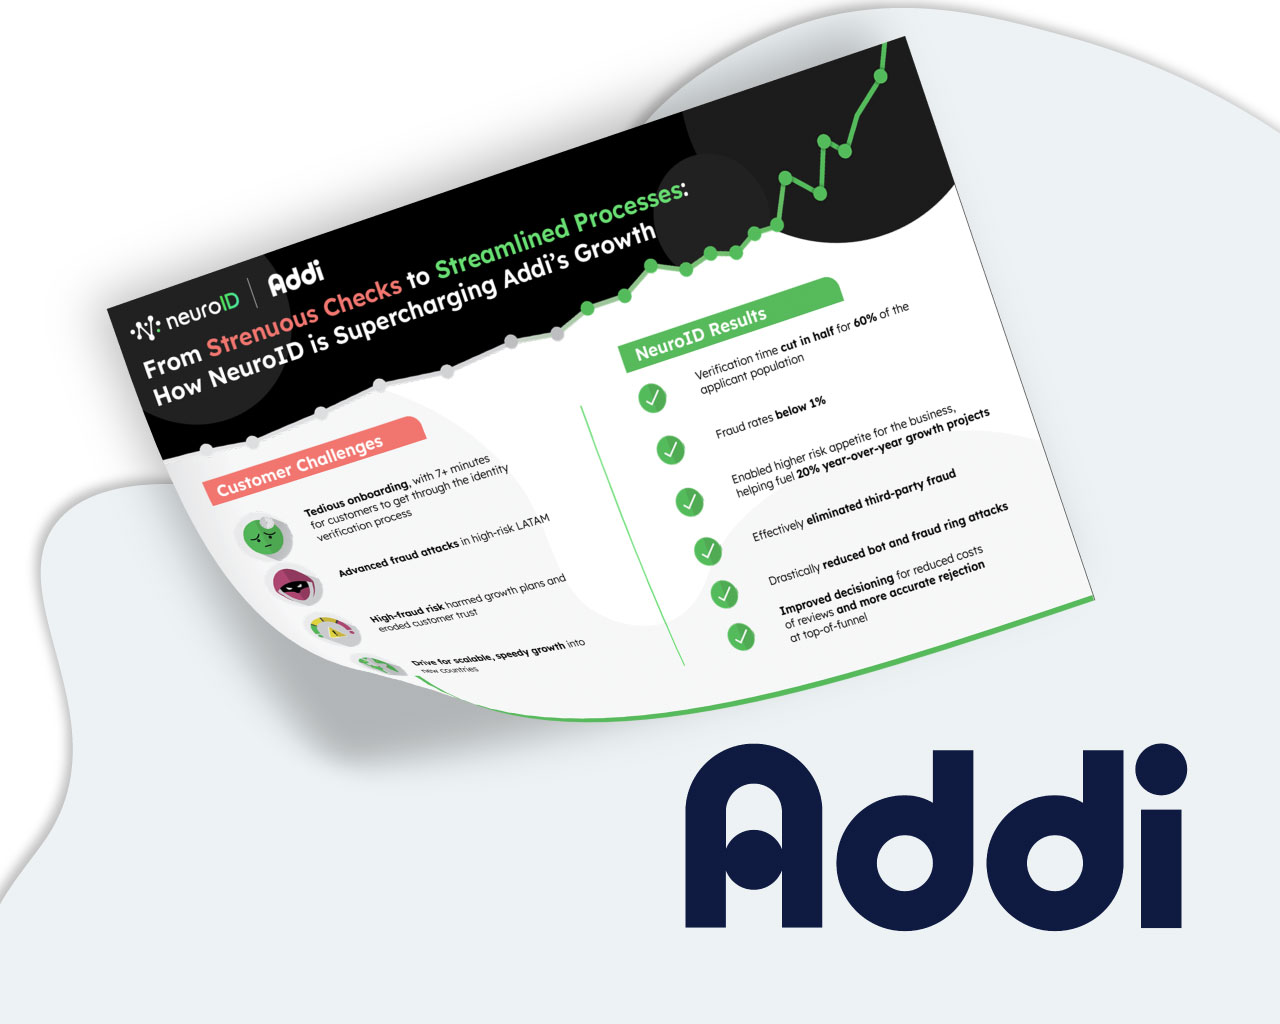 From Strenuous Checks to Streamlined Processes: How NeuroID is Supercharging Addi’s Growth